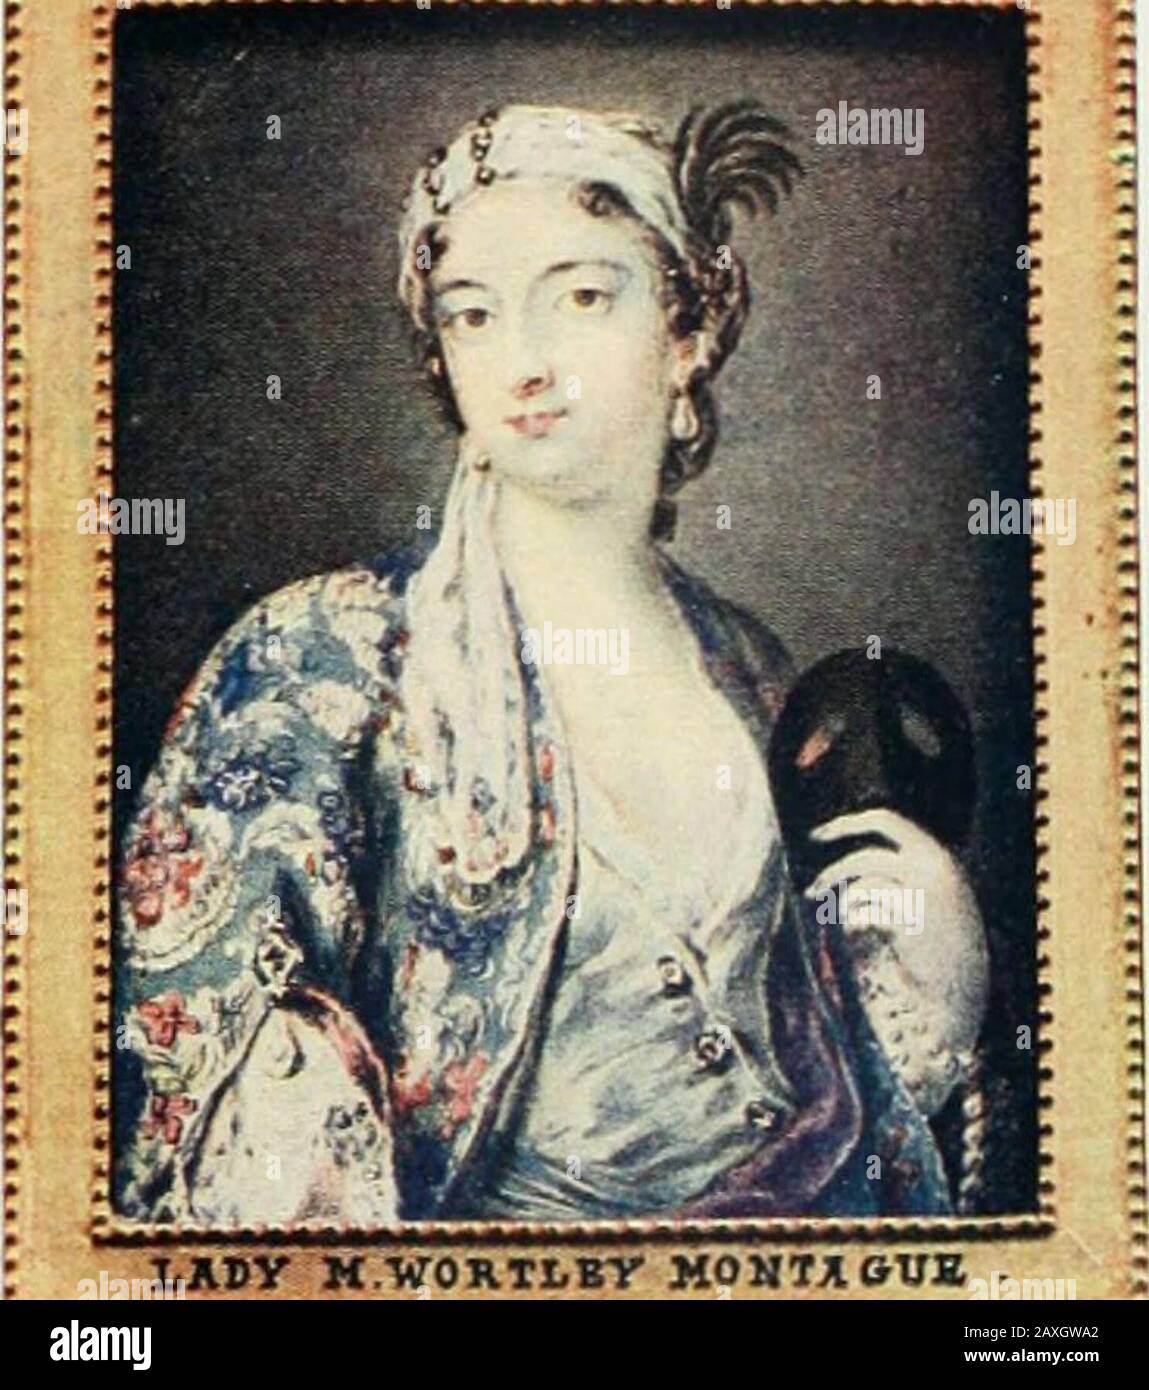 International studio . — ». . A LADY UNKNOWN.POSSIBLY BY GERVASE SPENCER JAMES II. KING OF SCOTLAND (1 A 30-1 4C0)ARTIST UNKNOWN MME. DE MONTESPAN.BY AN UNKNOWN FRENCH ARTIST LADY MARY WORTLEY MONTAGU (1689-1762&gt;ARTIST UNKNOWN. FROM THE MINIATURES IN THE COLLECTION OF EARL BEAUCHAMP, K,G. NOW ON VIEW ATTHE VICTORIA AND ALBERT MUSEUM. The Beauchamp Miniatures at the Victoria and Albert Museum Stock Photo